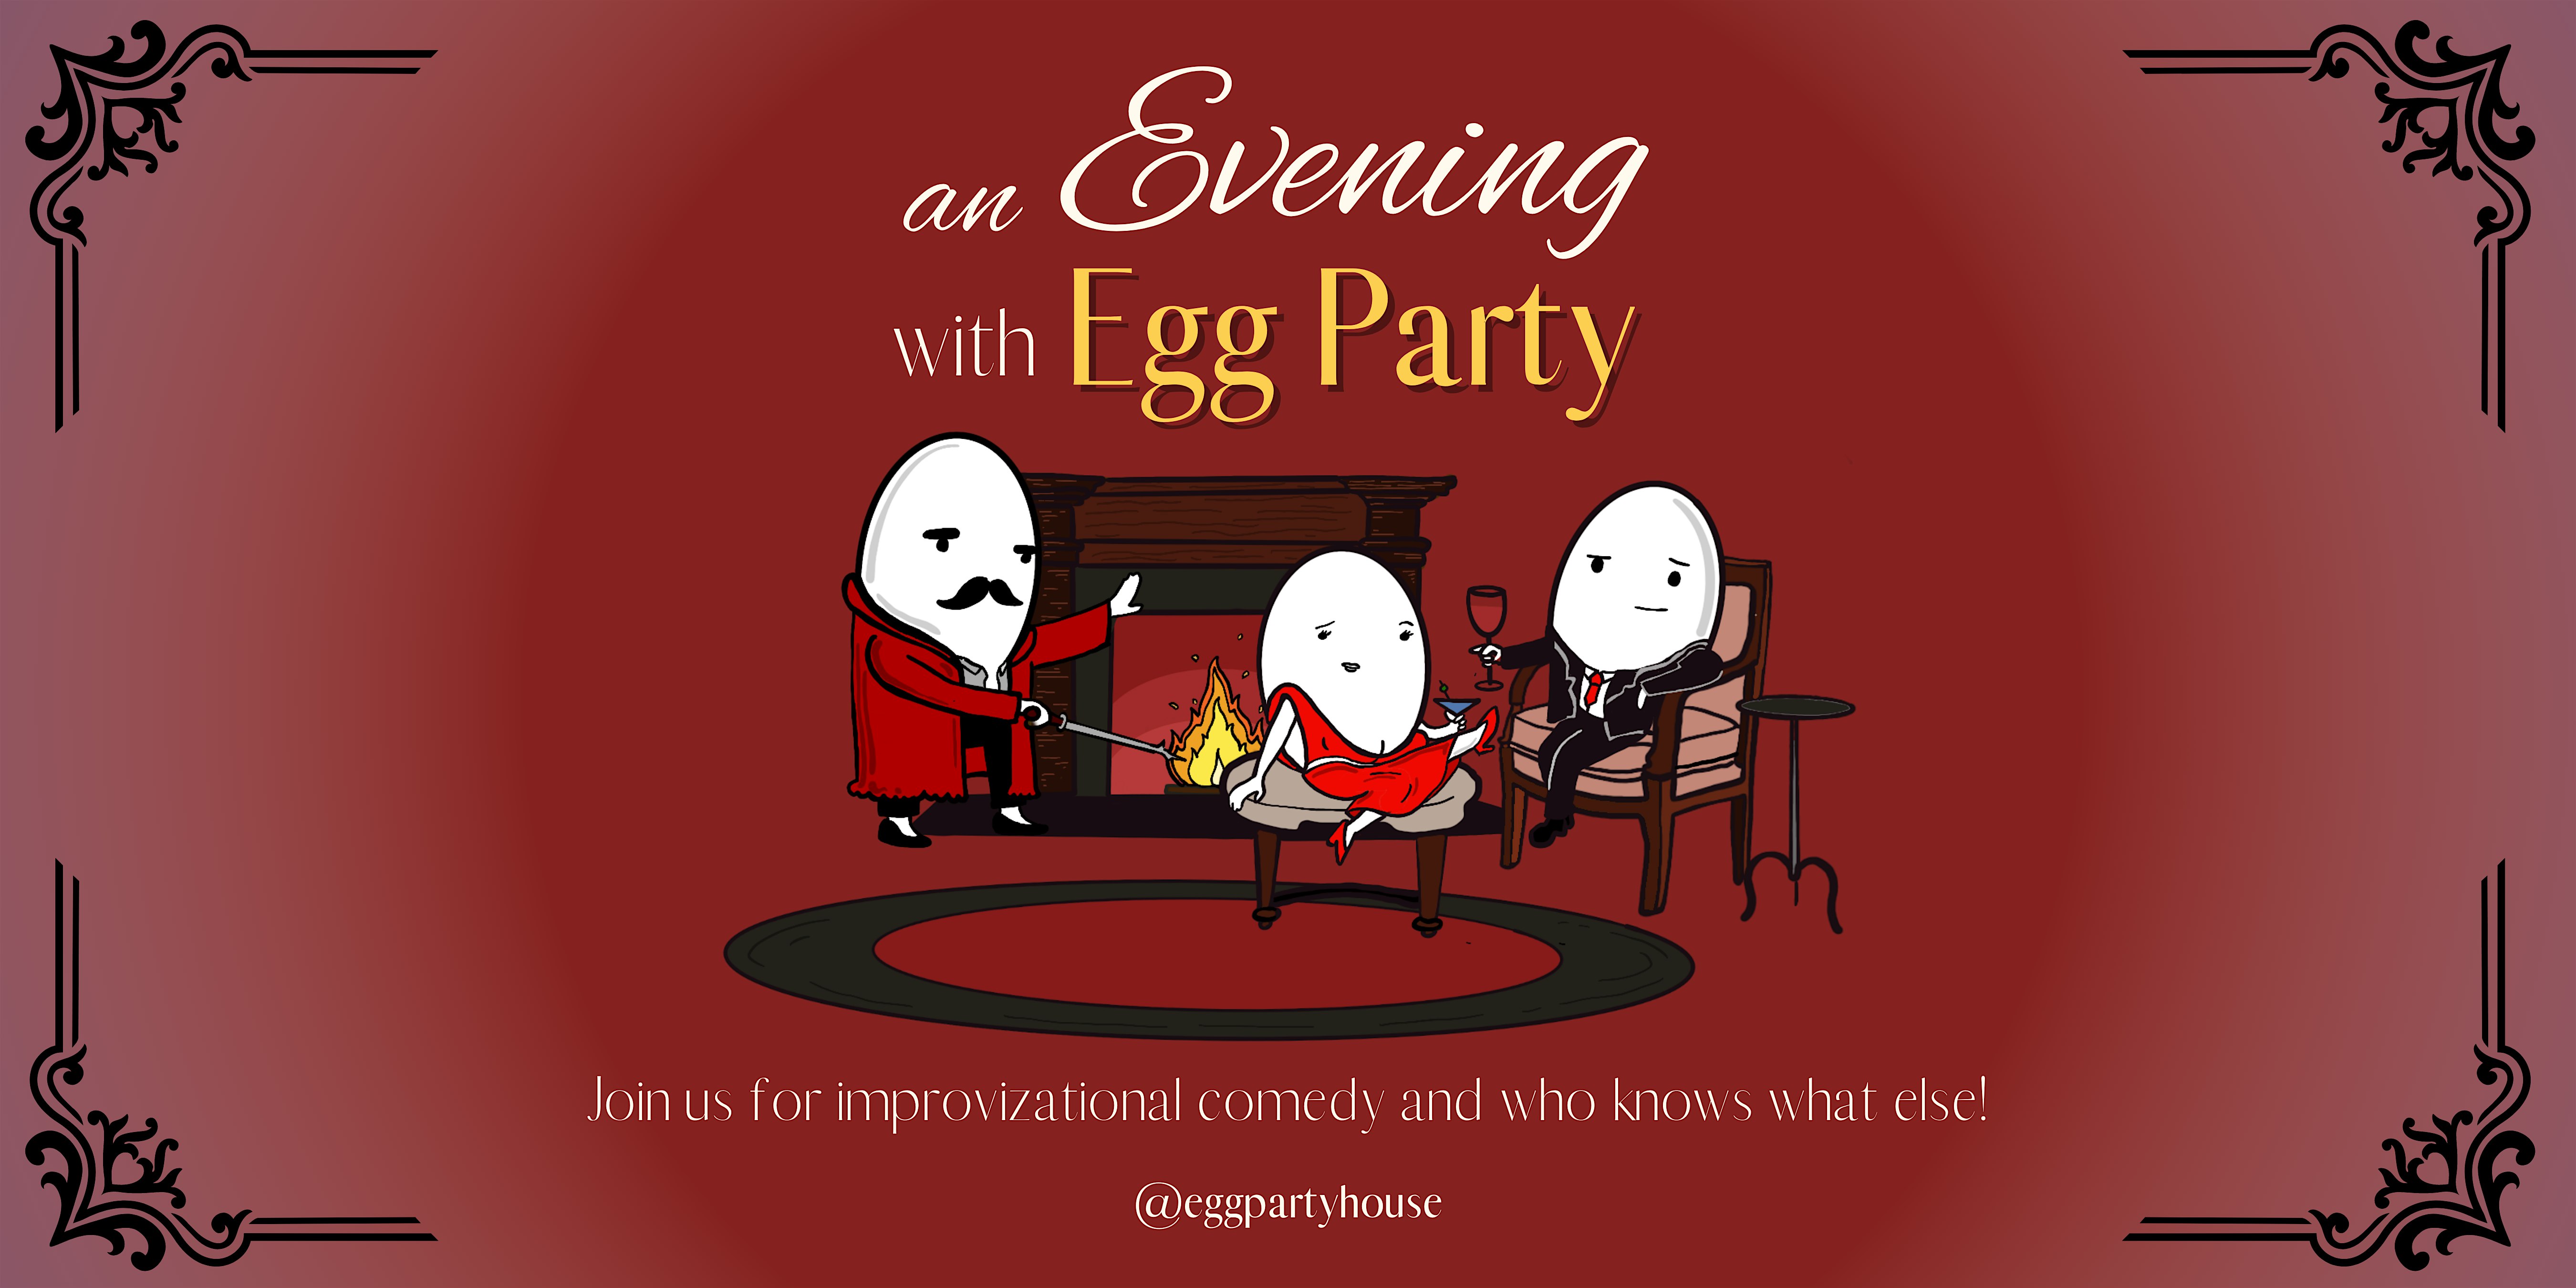 An Evening with Egg Party